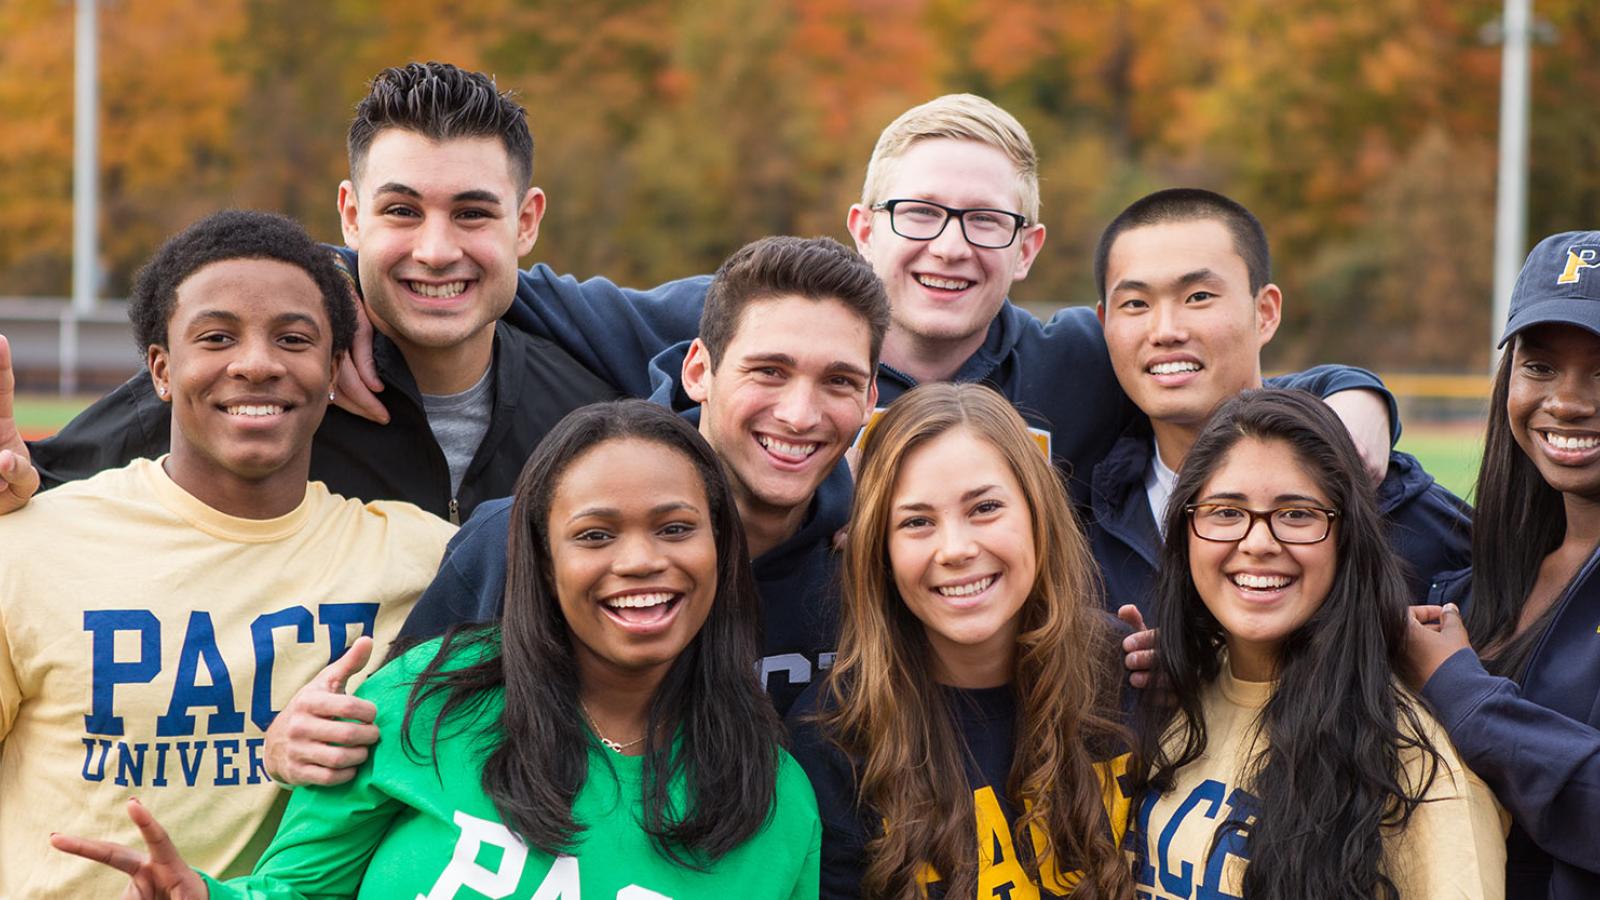 Group of Pace University students smiling at the camera.